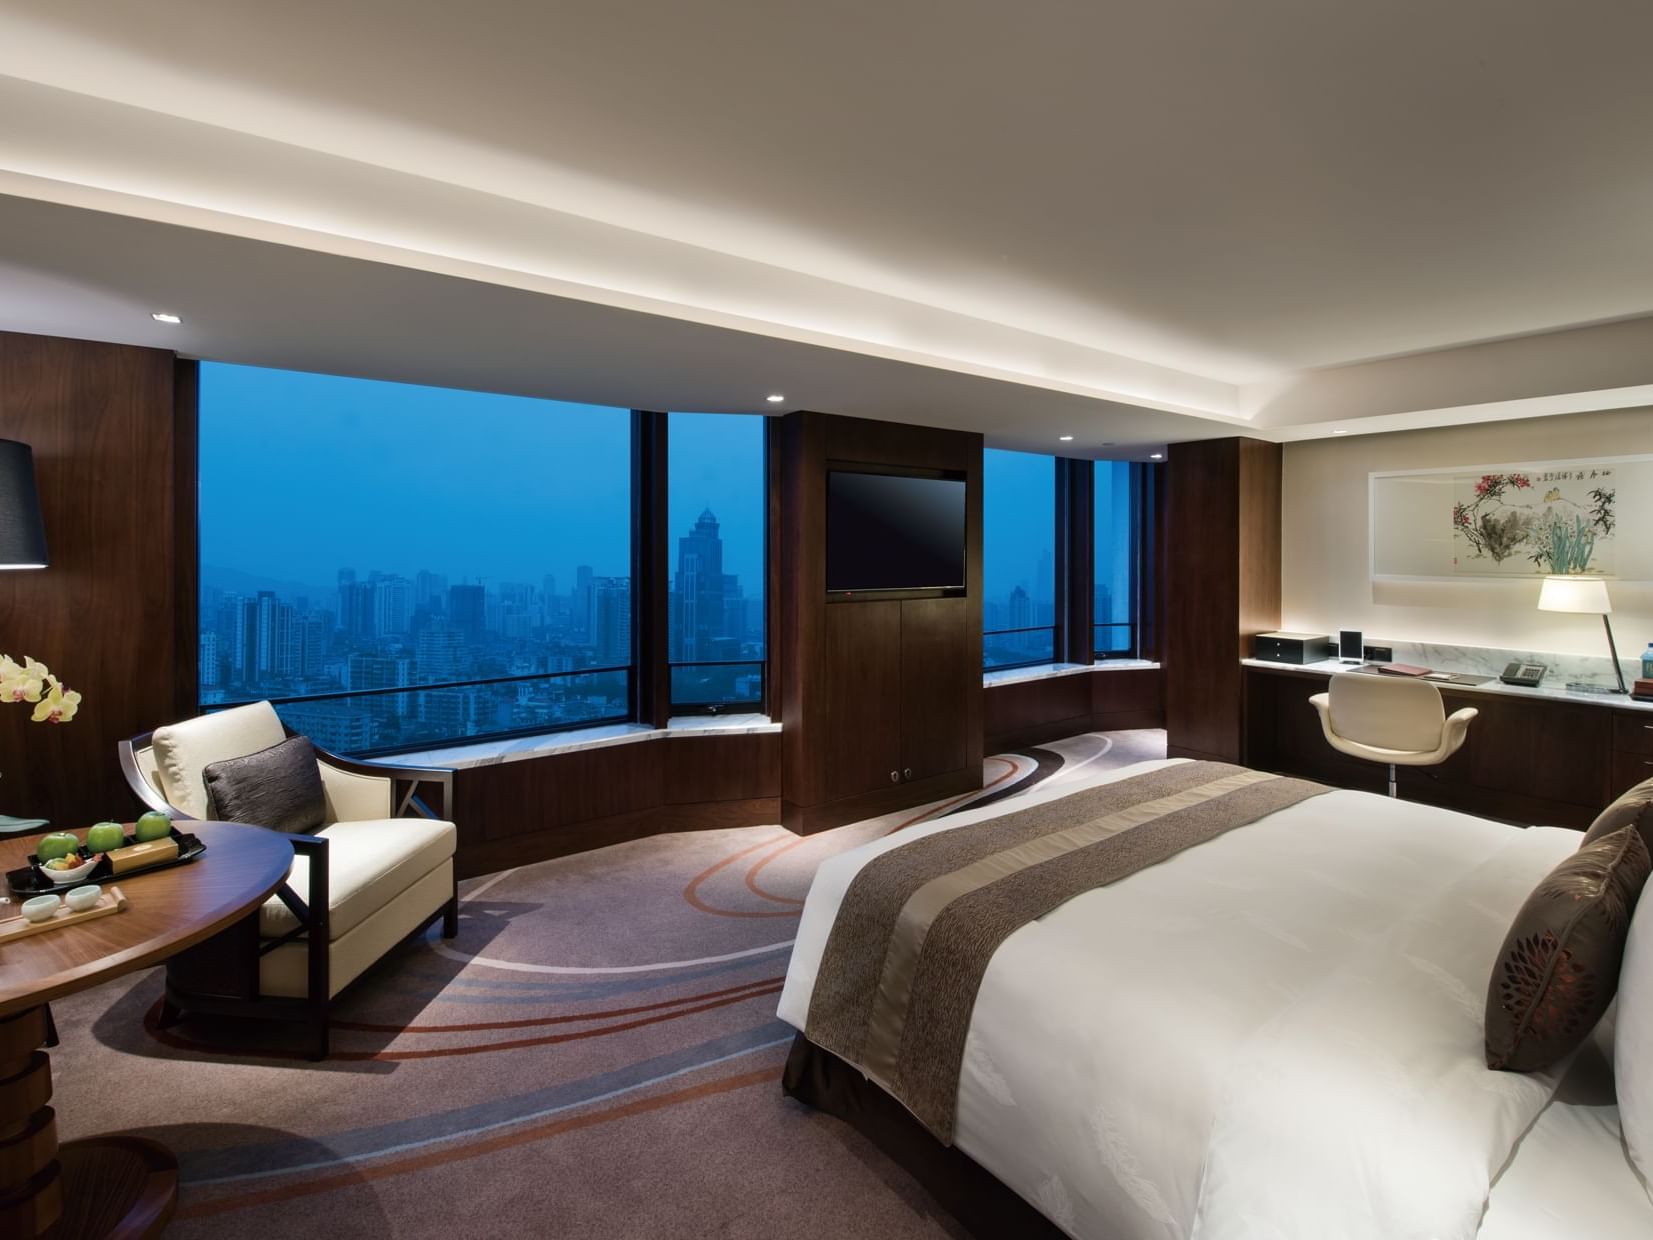 Interior of Deluxe Room with a city view at White Swan hotel